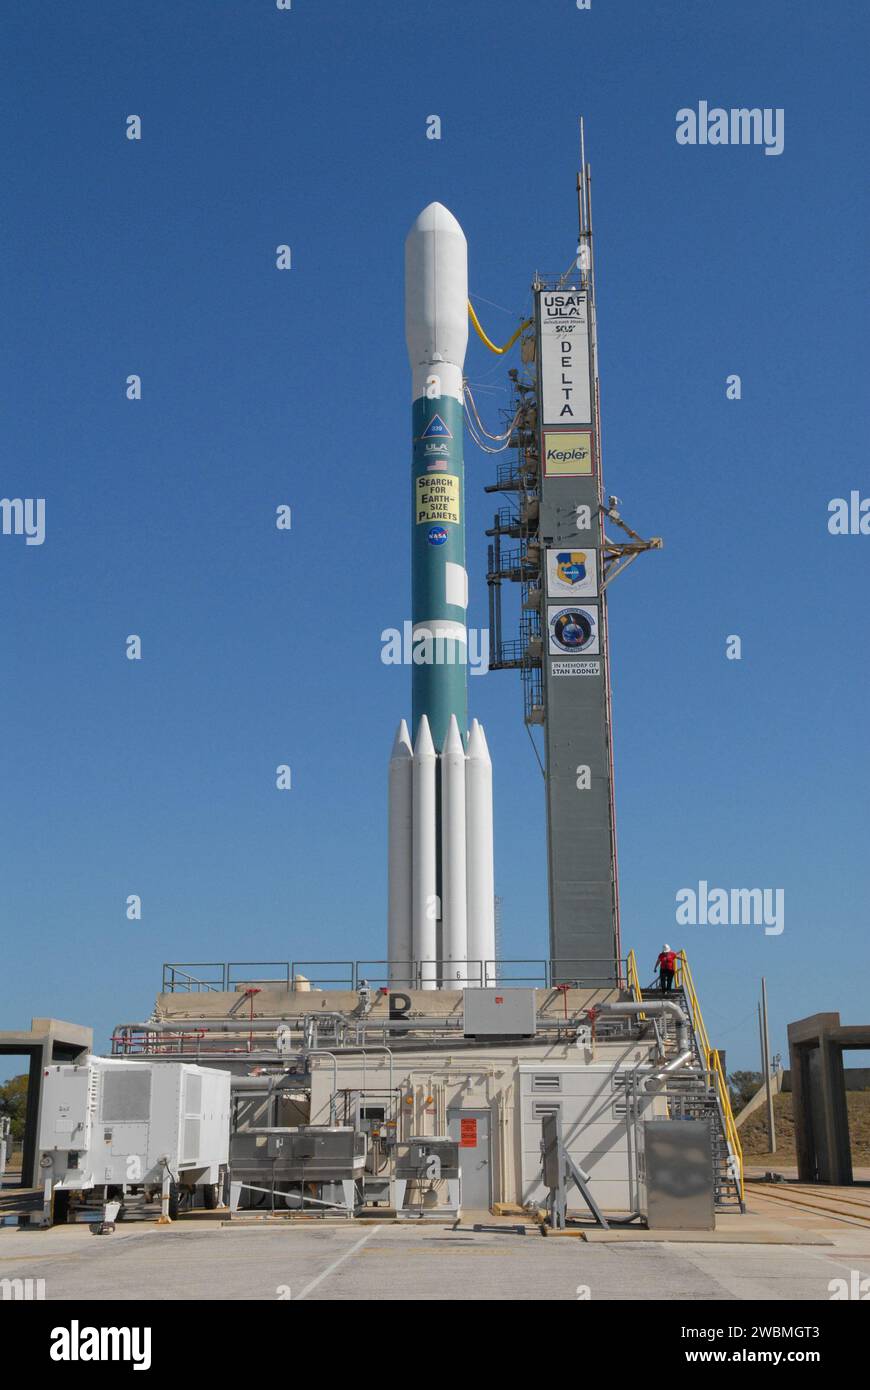 CAPE CANAVERAL, Fla. – The Delta II 7925 rocket stands ready for launch following rollback of the mobile service tower on Launch Pad 17-B at Cape Canaveral Air Force Station in Florida.  Atop  the rocket is NASA's Kepler spacecraft. Kepler is a spaceborne telescope designed to search the nearby region of our galaxy for Earth-size planets orbiting in the habitable zone of stars like our sun. The habitable zone is the region around a star where temperatures permit water to be liquid on a planet's surface.  The challenge for Kepler is to look at a large number of stars in order to statistically e Stock Photo